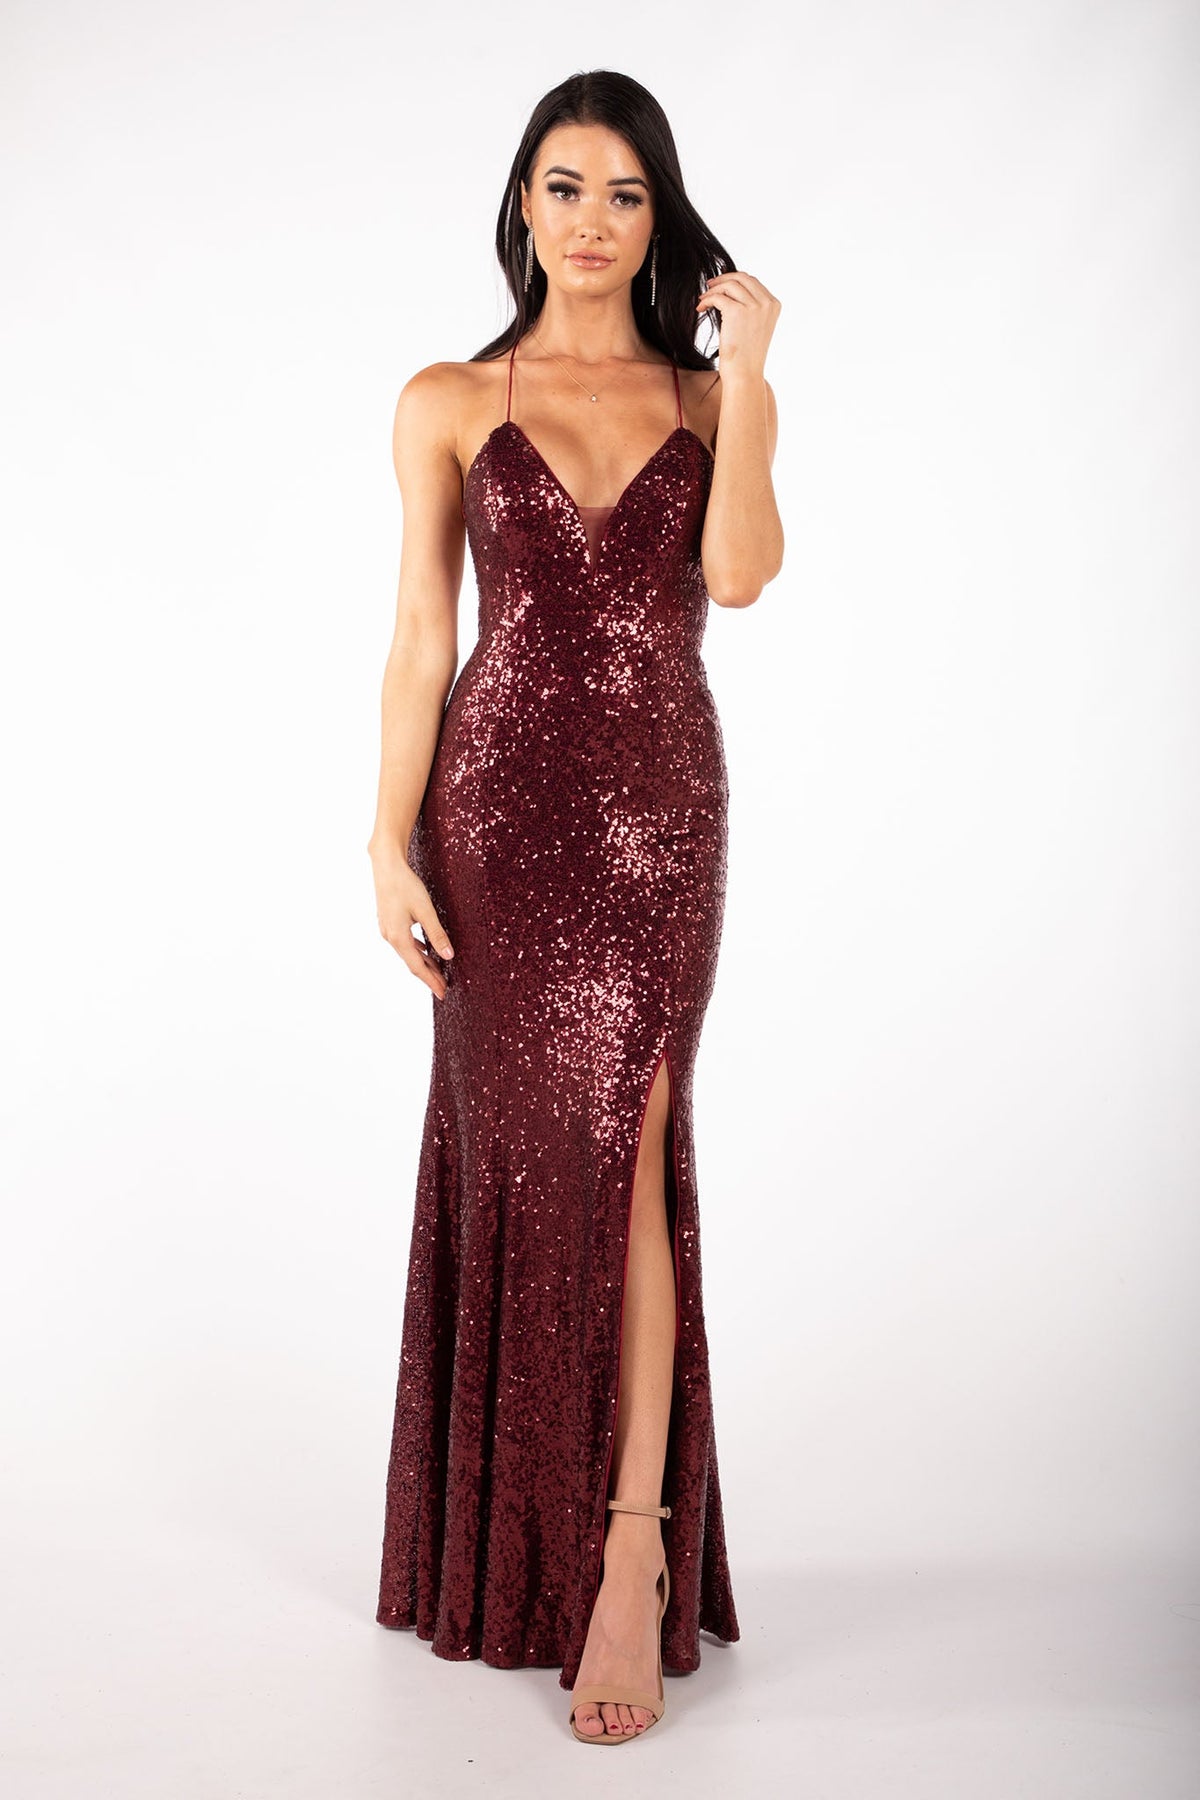 Fresia Lace Up Sequin Gown - Burgundy – Noodz Boutique